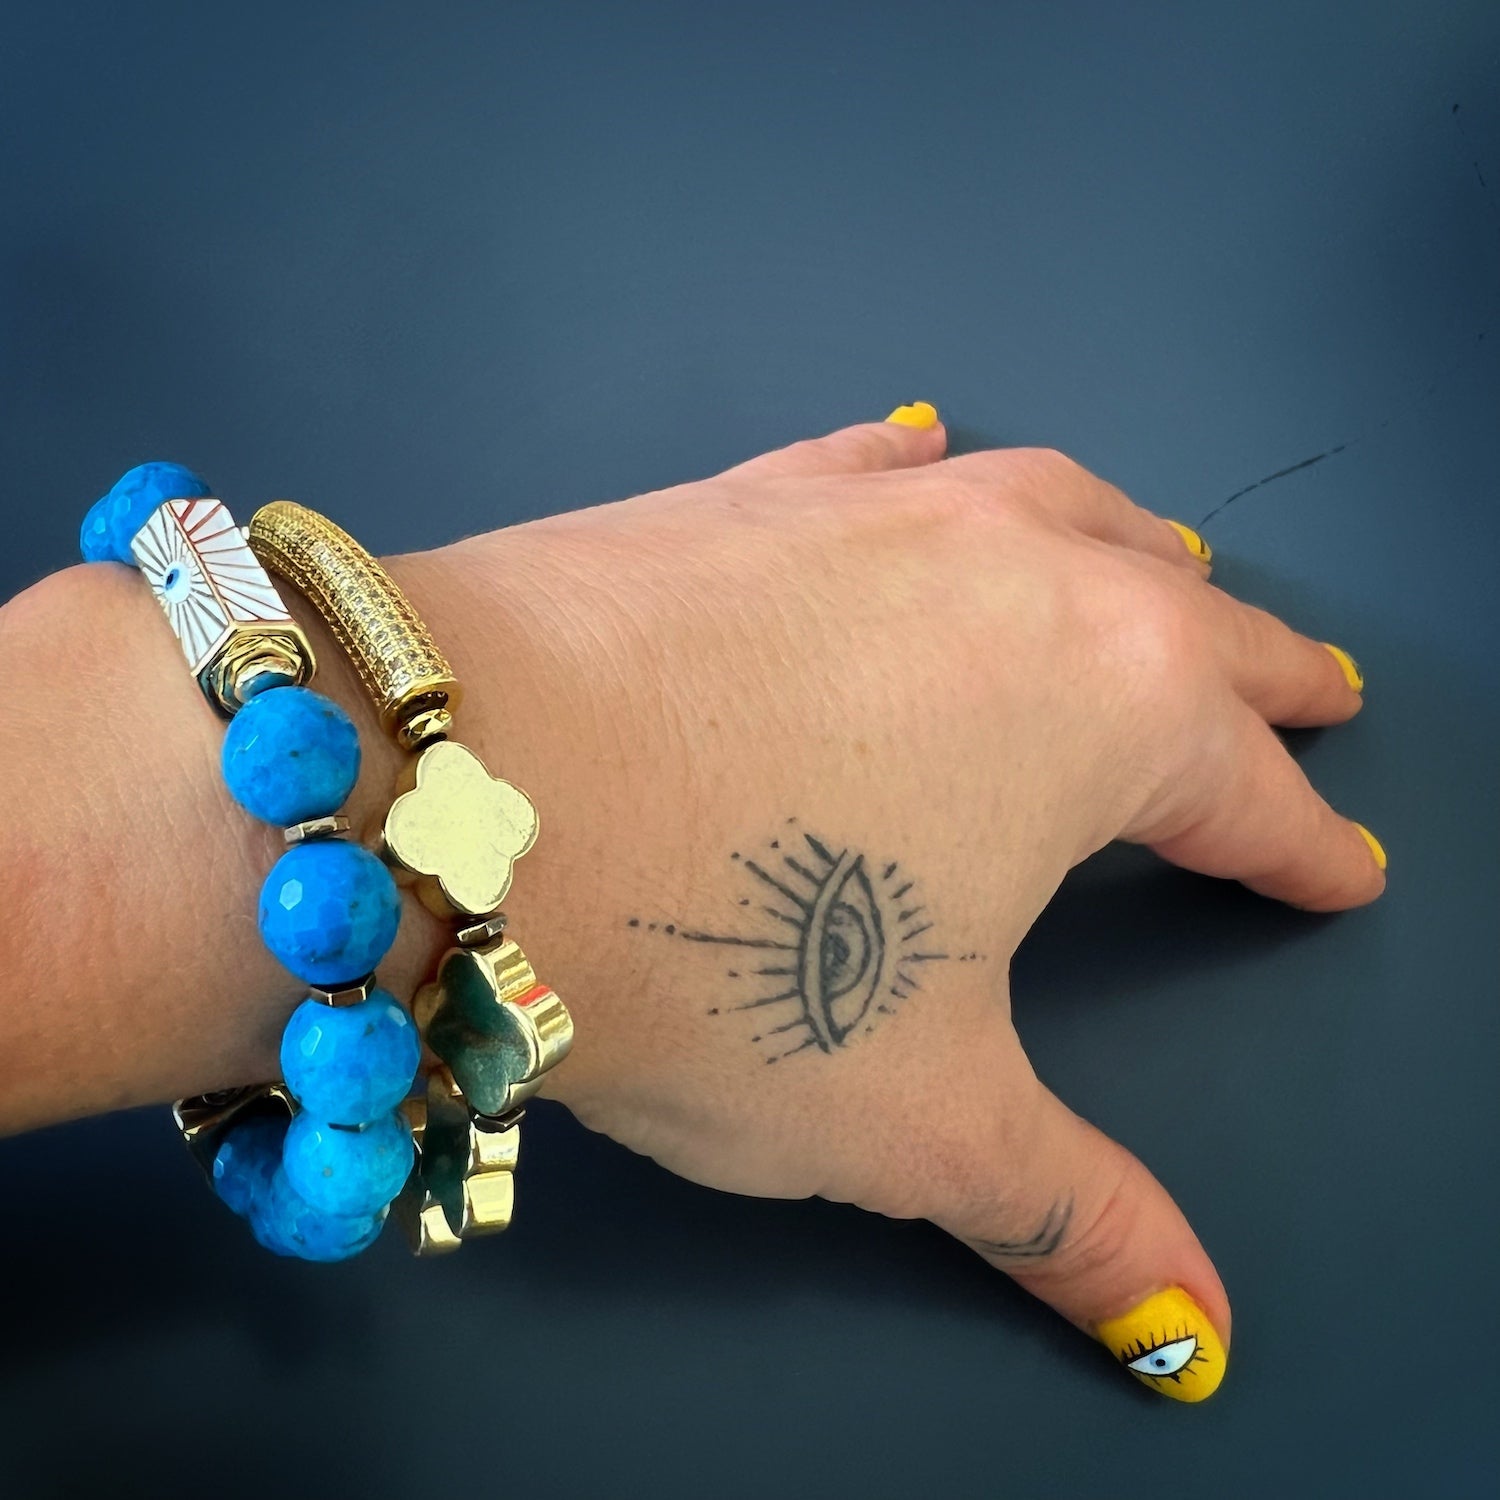 A hand model wearing the Diamond and Gold Clover Bracelet, showcasing its elegant design with gold hematite clover beads, a diamond tube accent, and a stretchy jewelry cord for a comfortable fit.